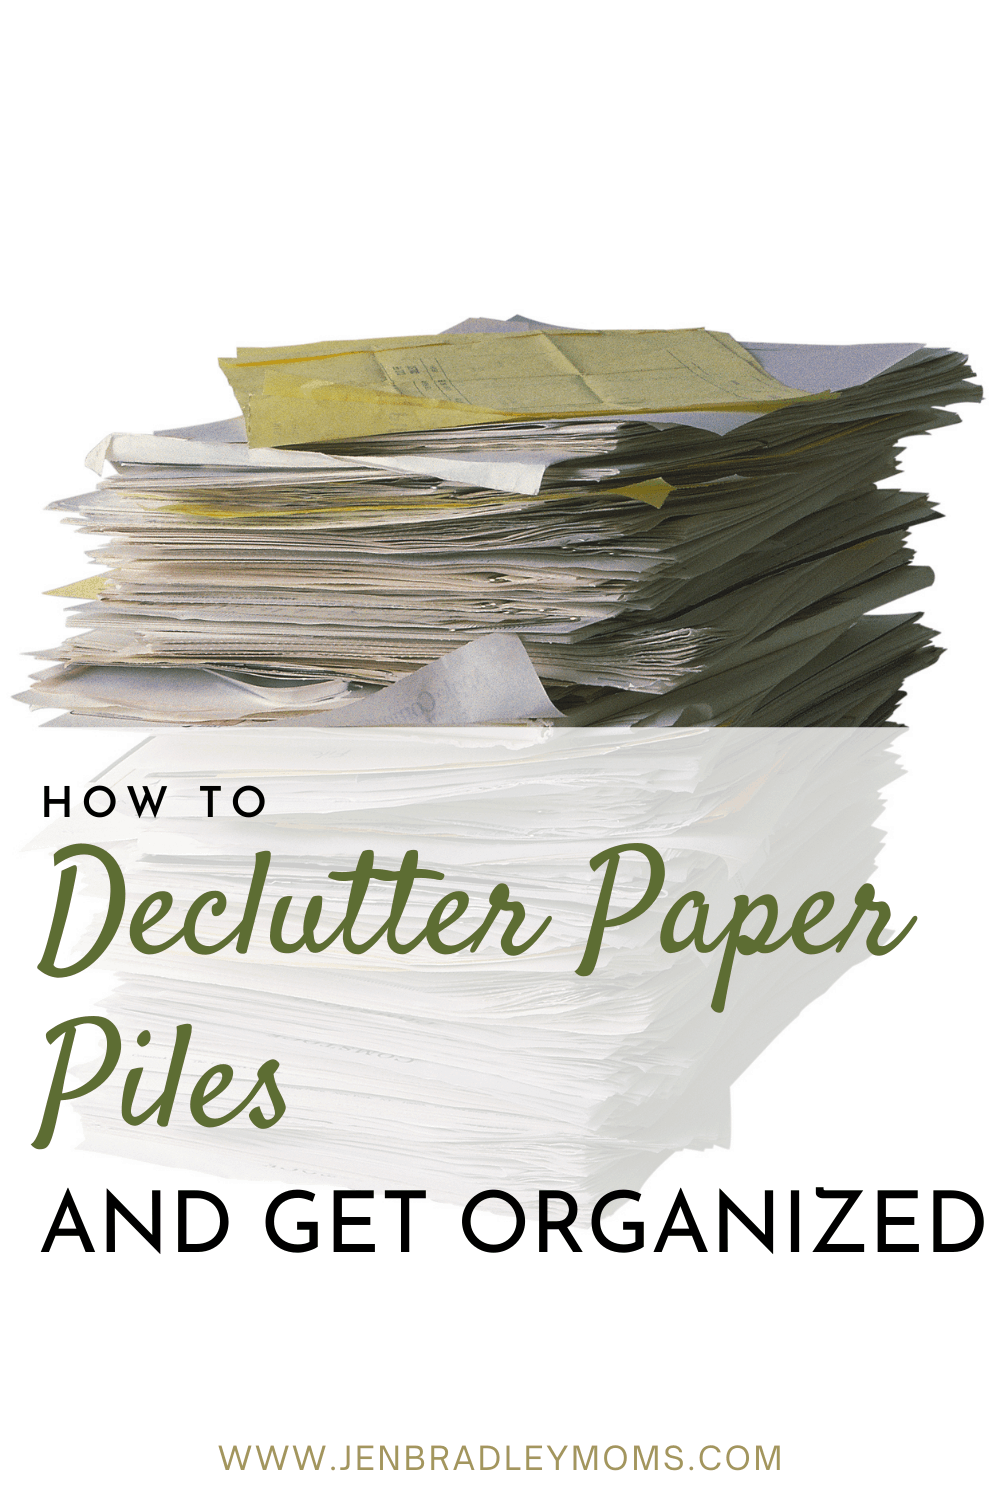 How to Declutter Paper - The Awesome Step-by-Step Guide